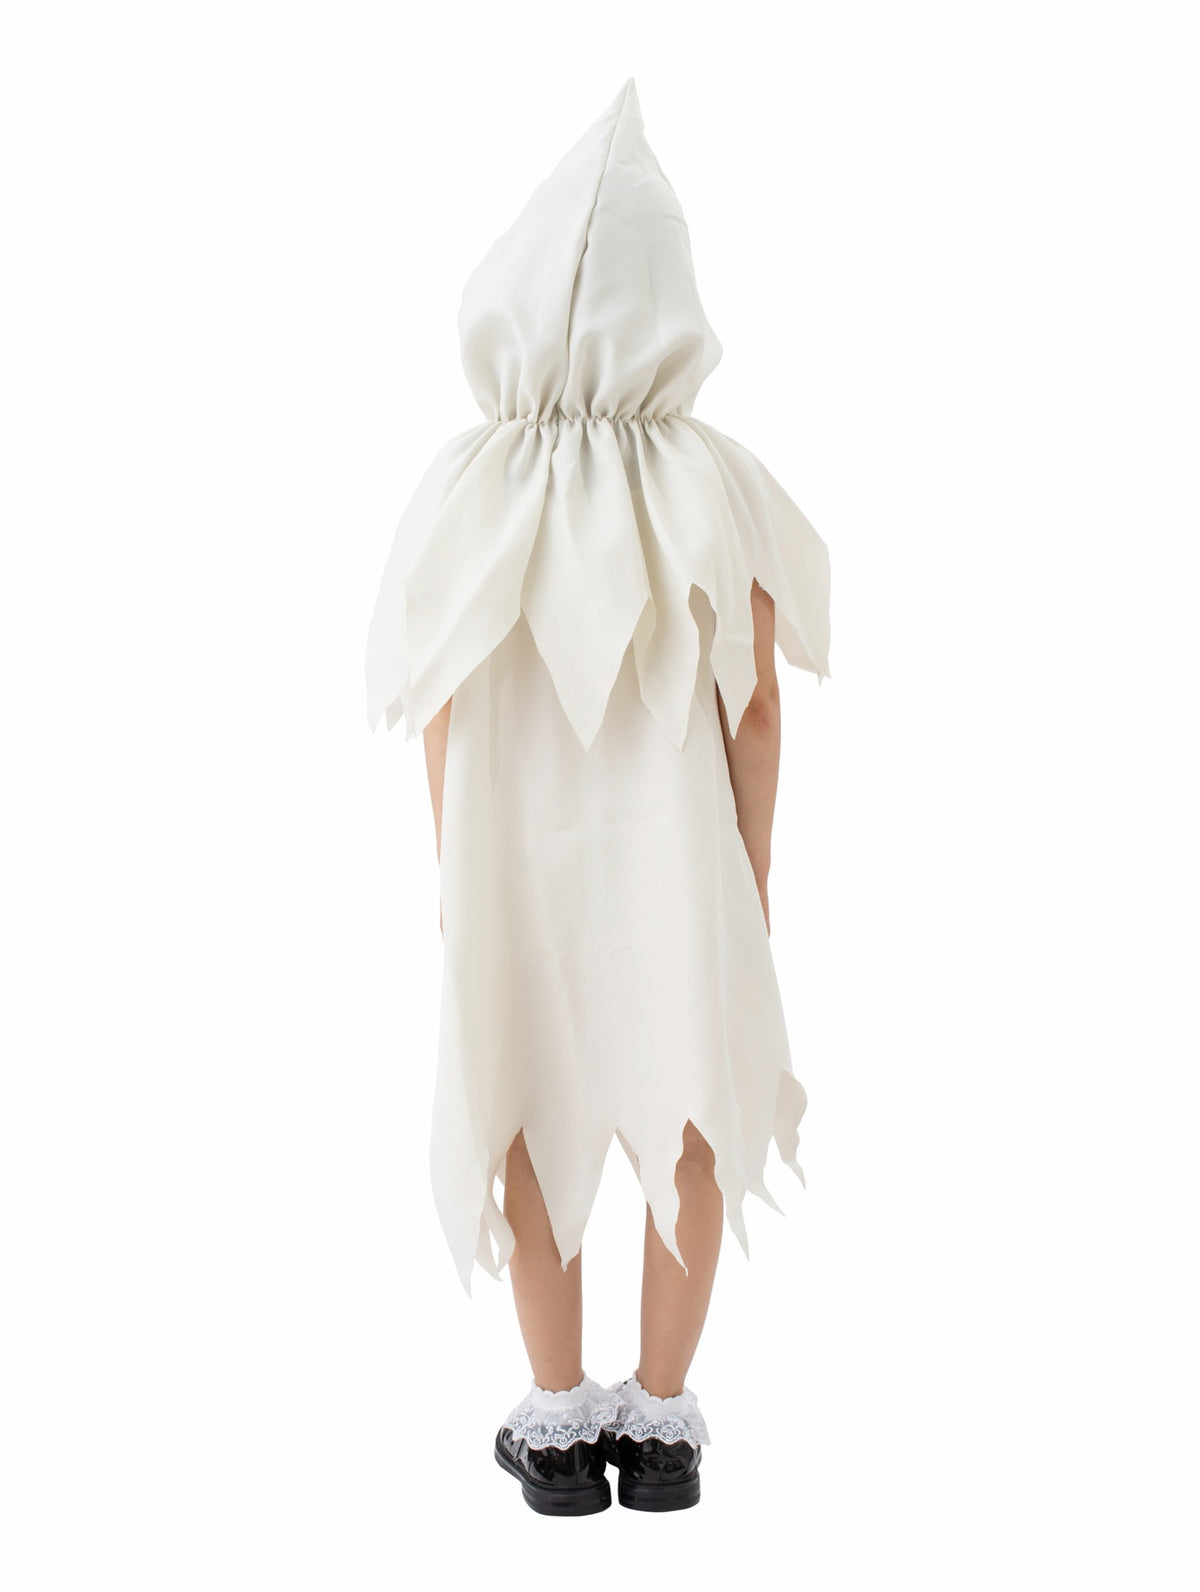 Naughty Little Ghost Children Costumes two piece set